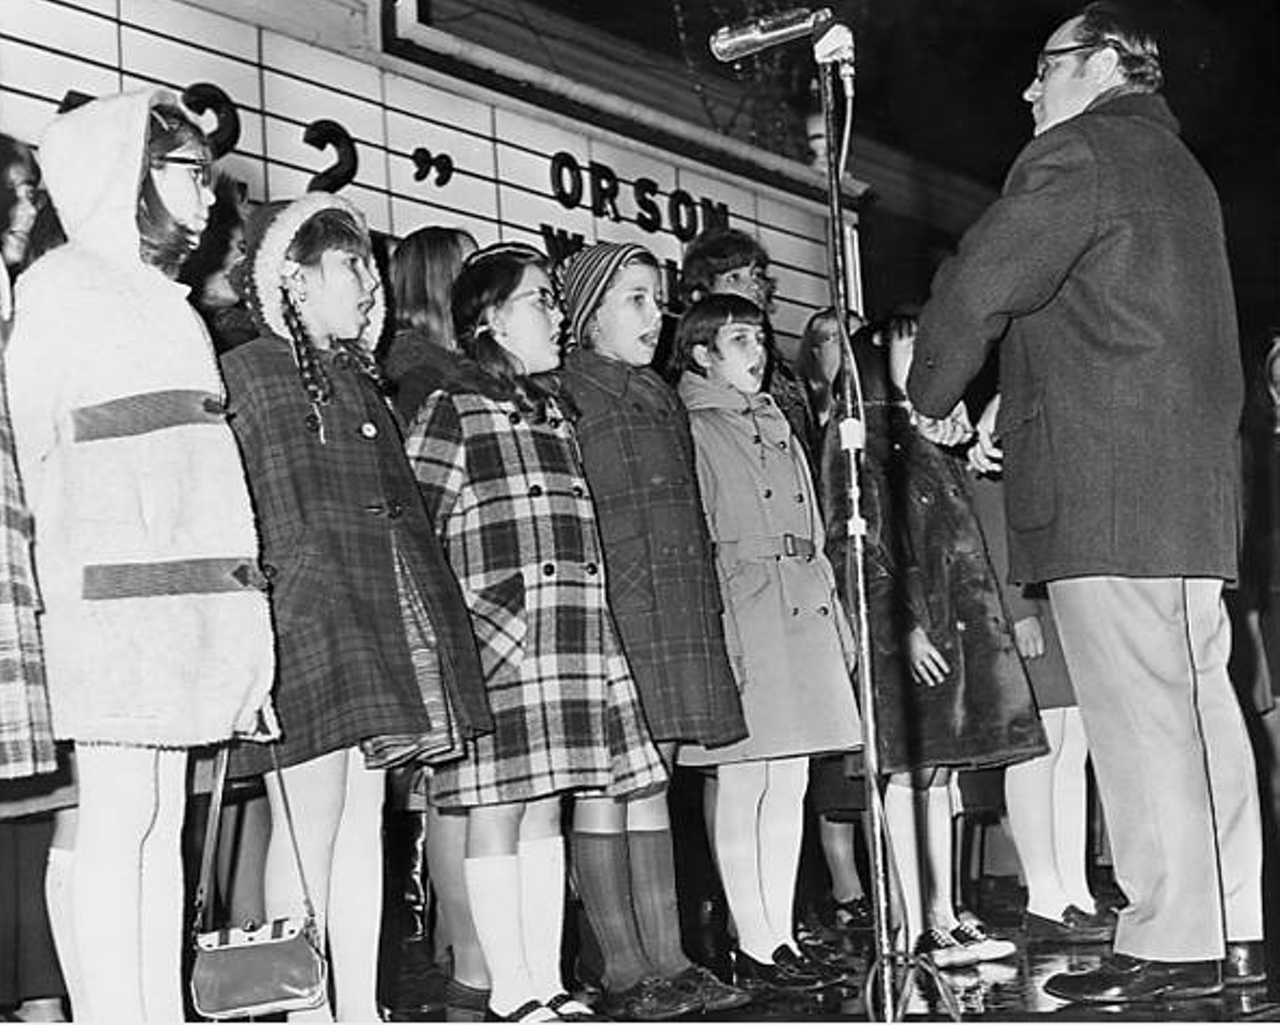 1970: German Youth Choir sings at the Christmas tree lighting at Shaker Square.